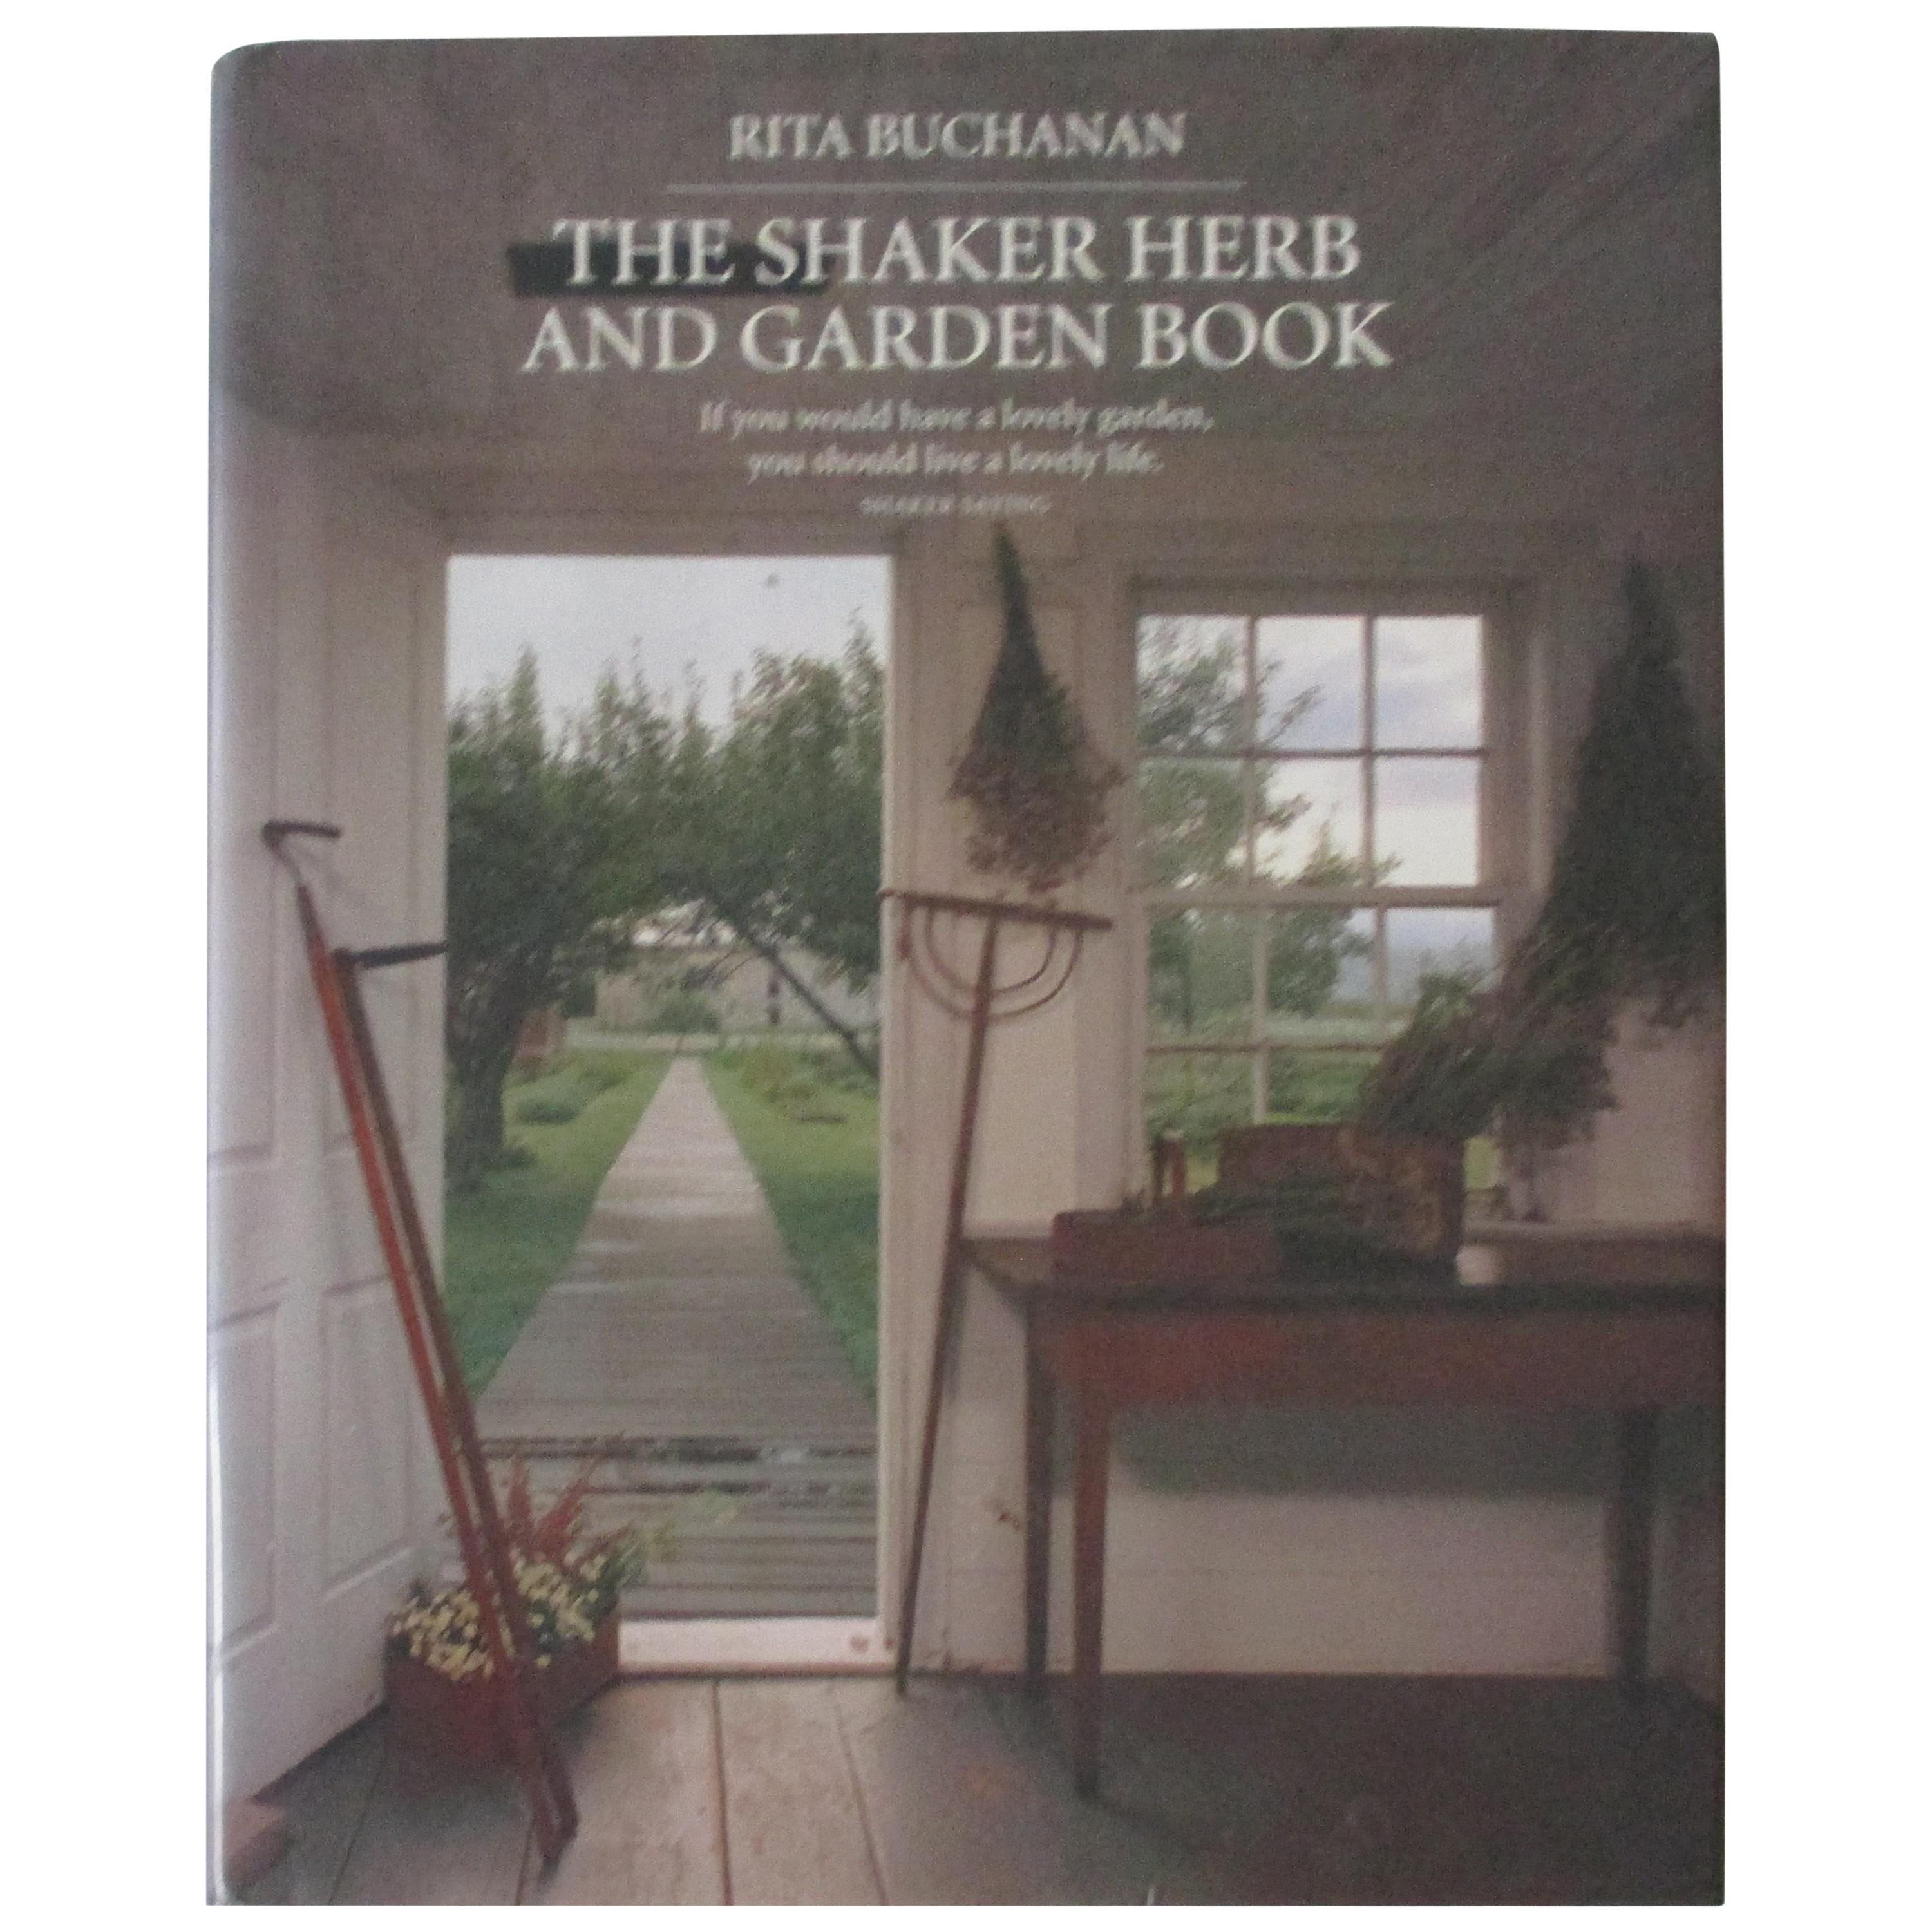 The Shaker Herb and Garden Vintage Book by R. Buchannan